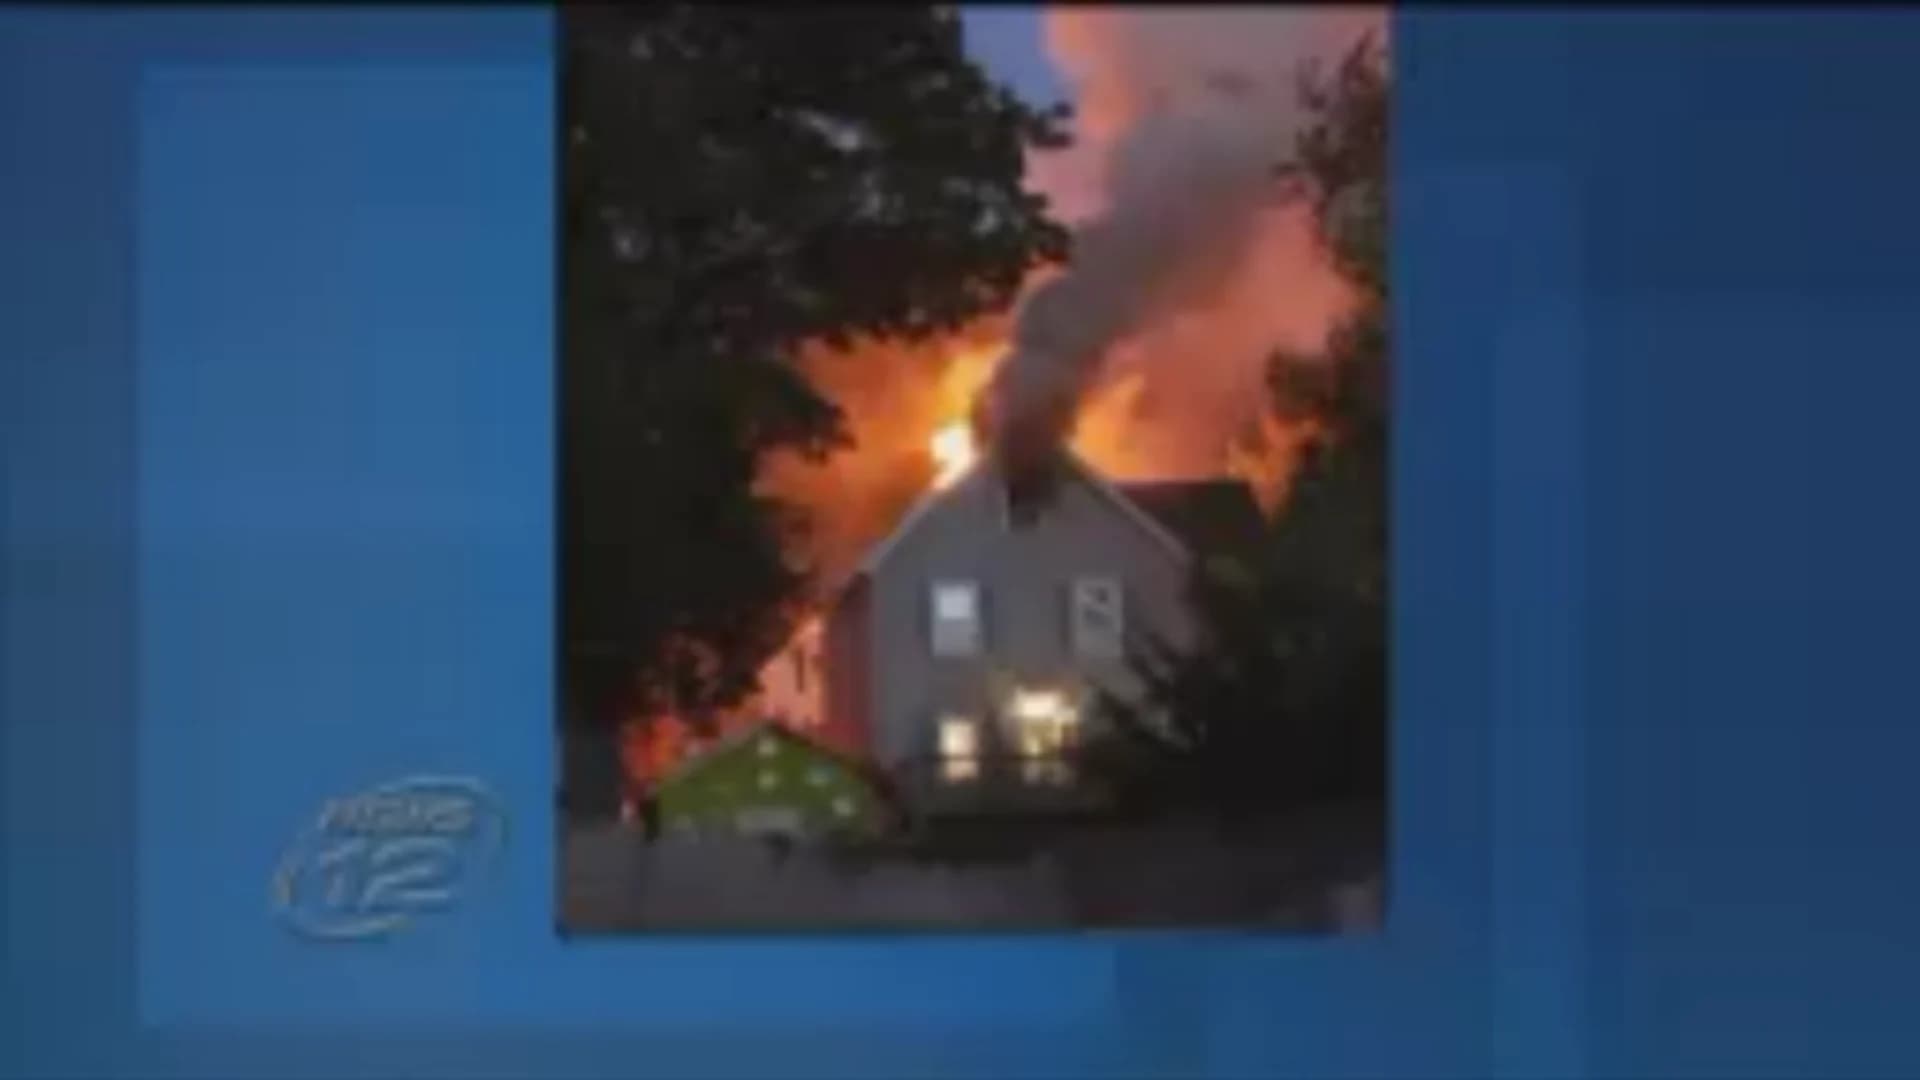 Officials: 1 injured in Peekskill house fire